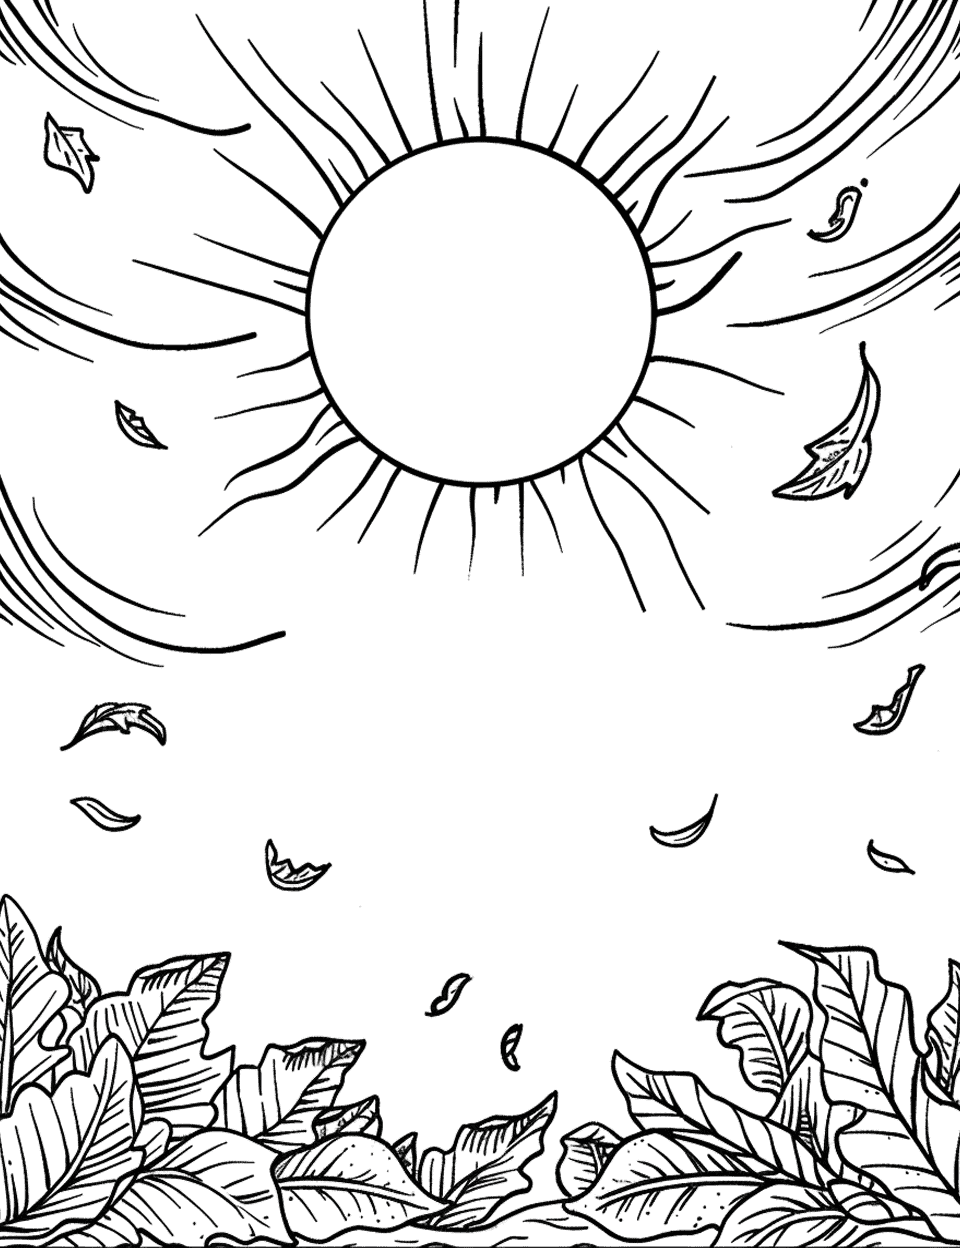 Sun and Falling Autumn Leaves Coloring Page - The sun shining through falling autumn leaves.